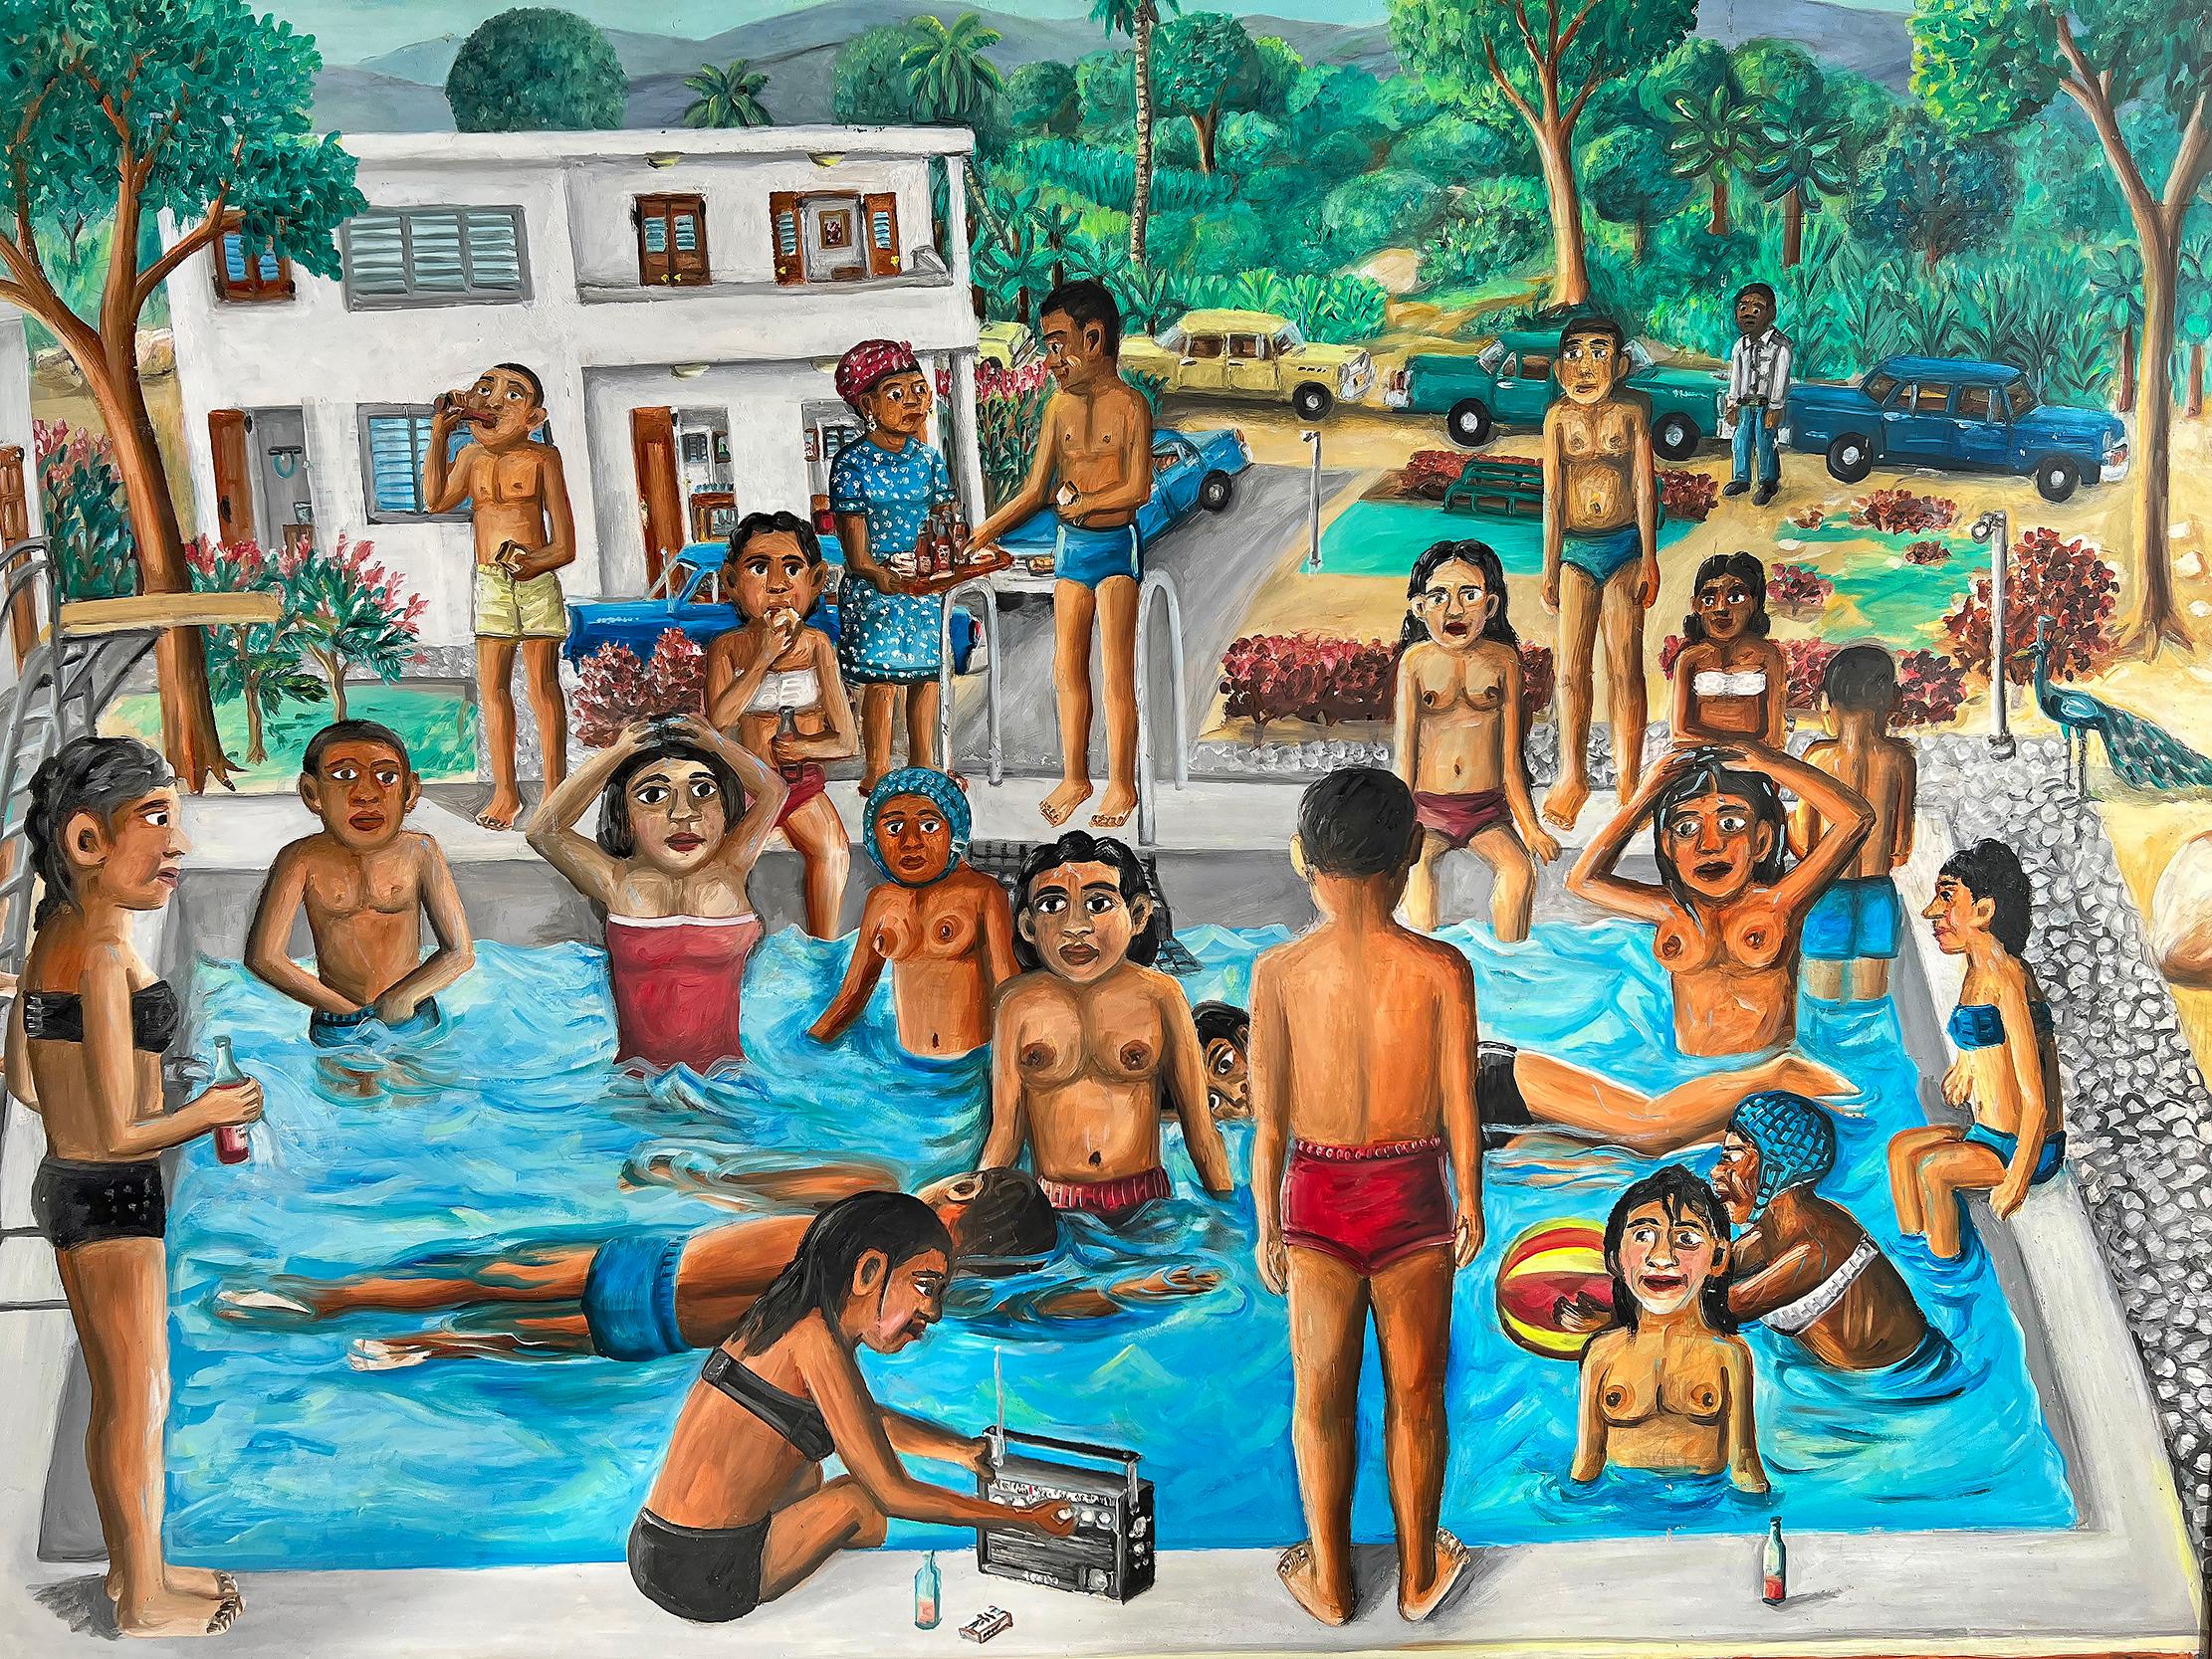 Wilson Bigaud Nude Painting - What Are They Looking At ?  Sexy Nude Naive Caribbean Art , Swimming Pool  Party